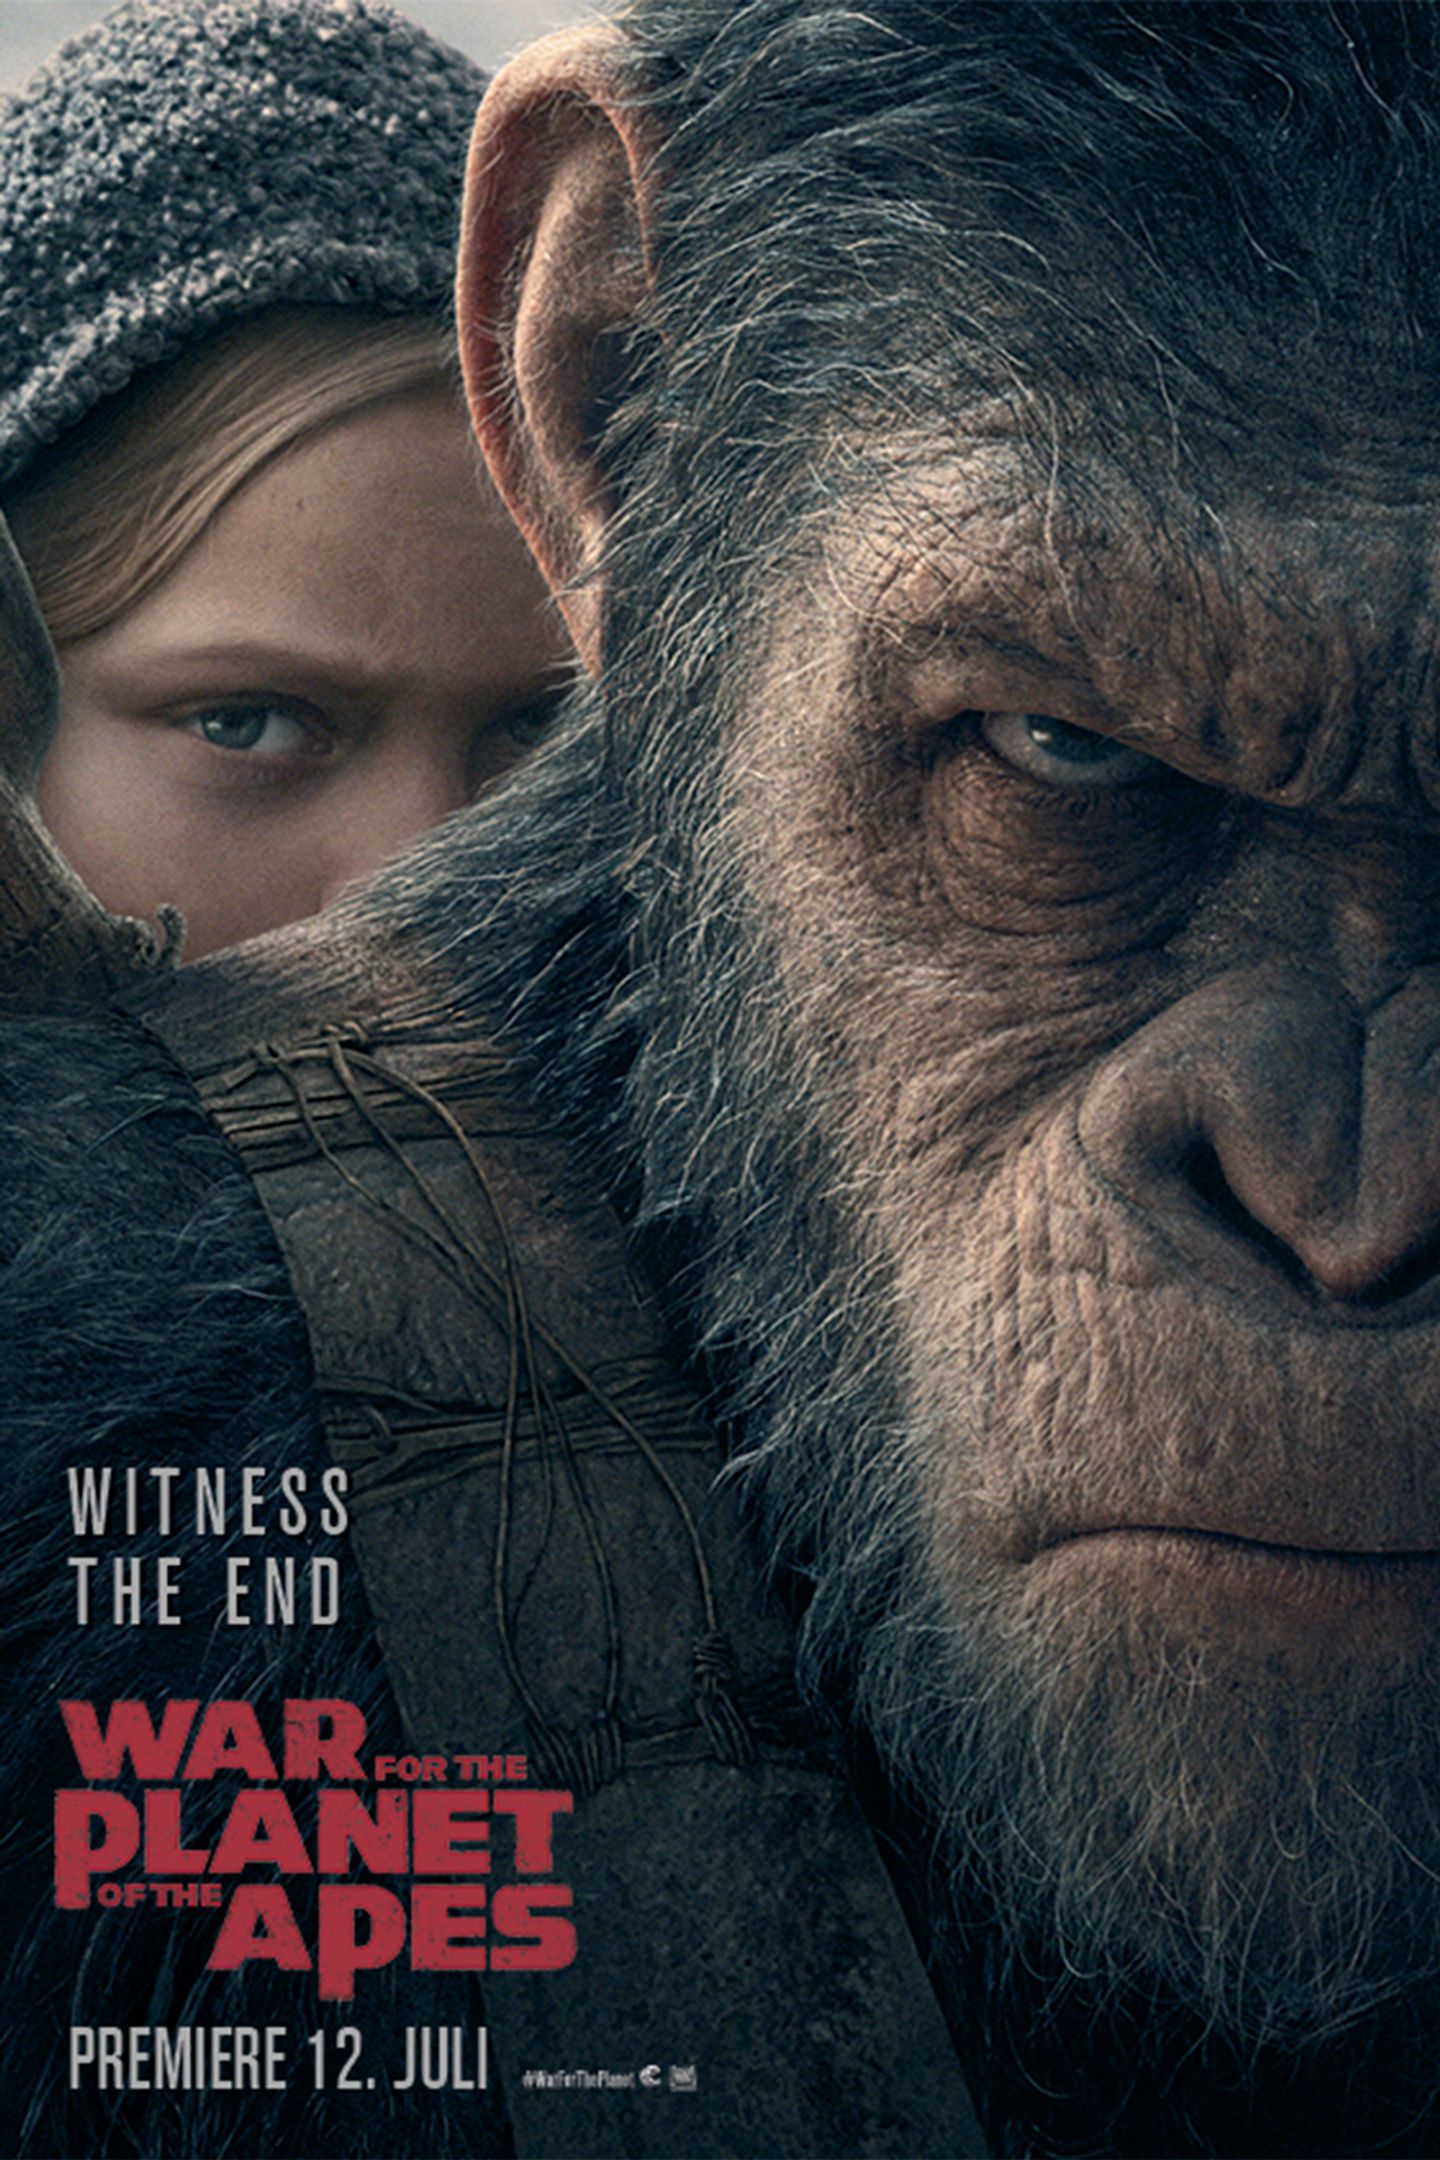 Plakat for 'War for the Planet of the Apes'